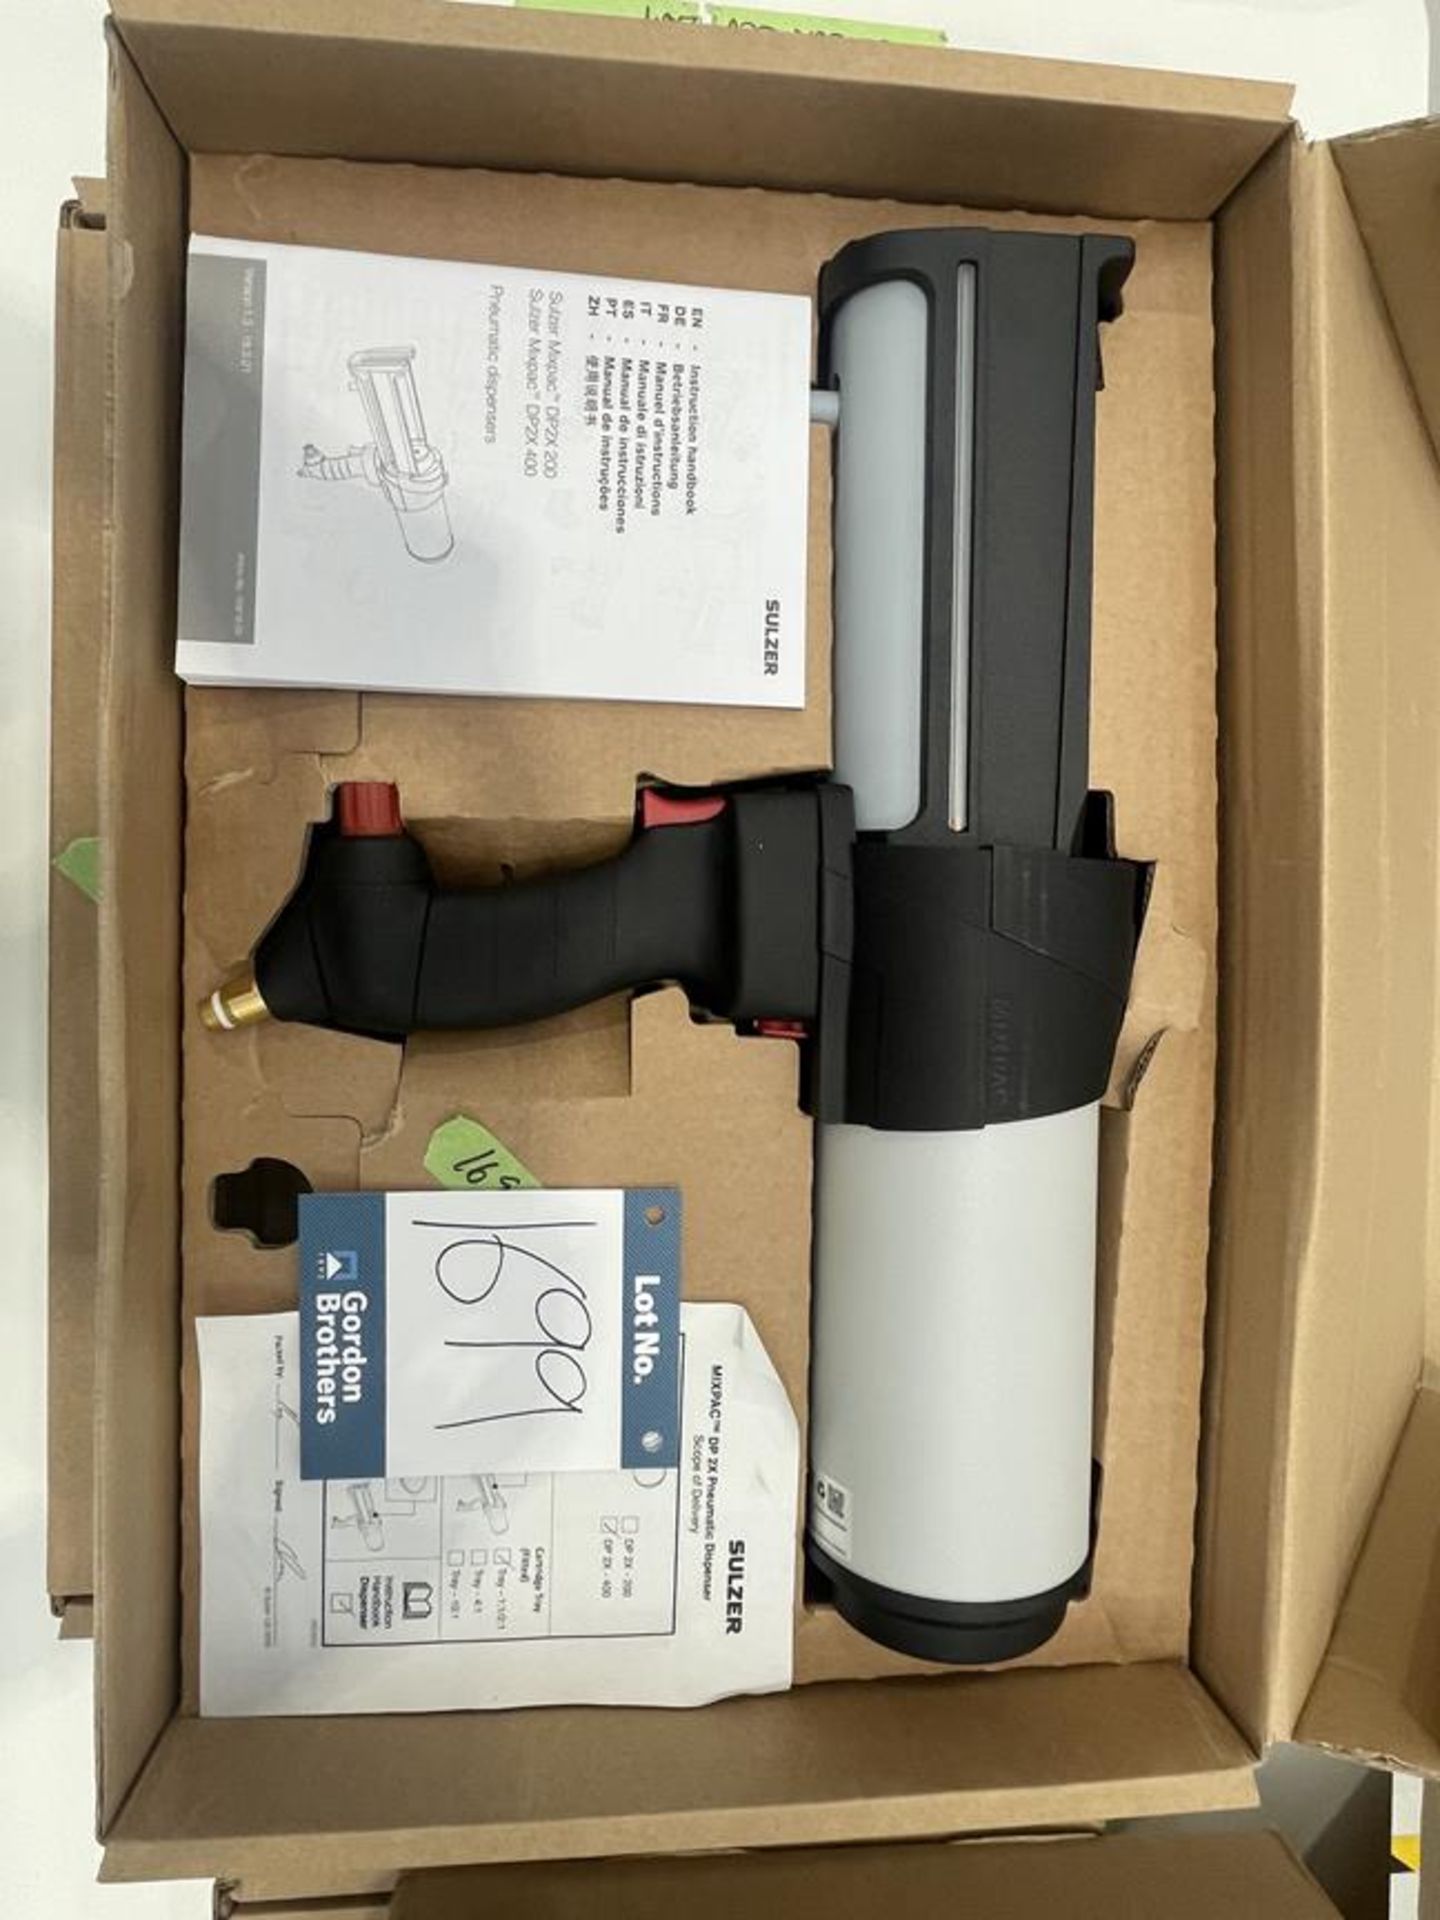 2x (no.) Sulzer, Mixpac DP2X400 pnuematic sealant dispensing guns (boxed and unused) - Image 2 of 3